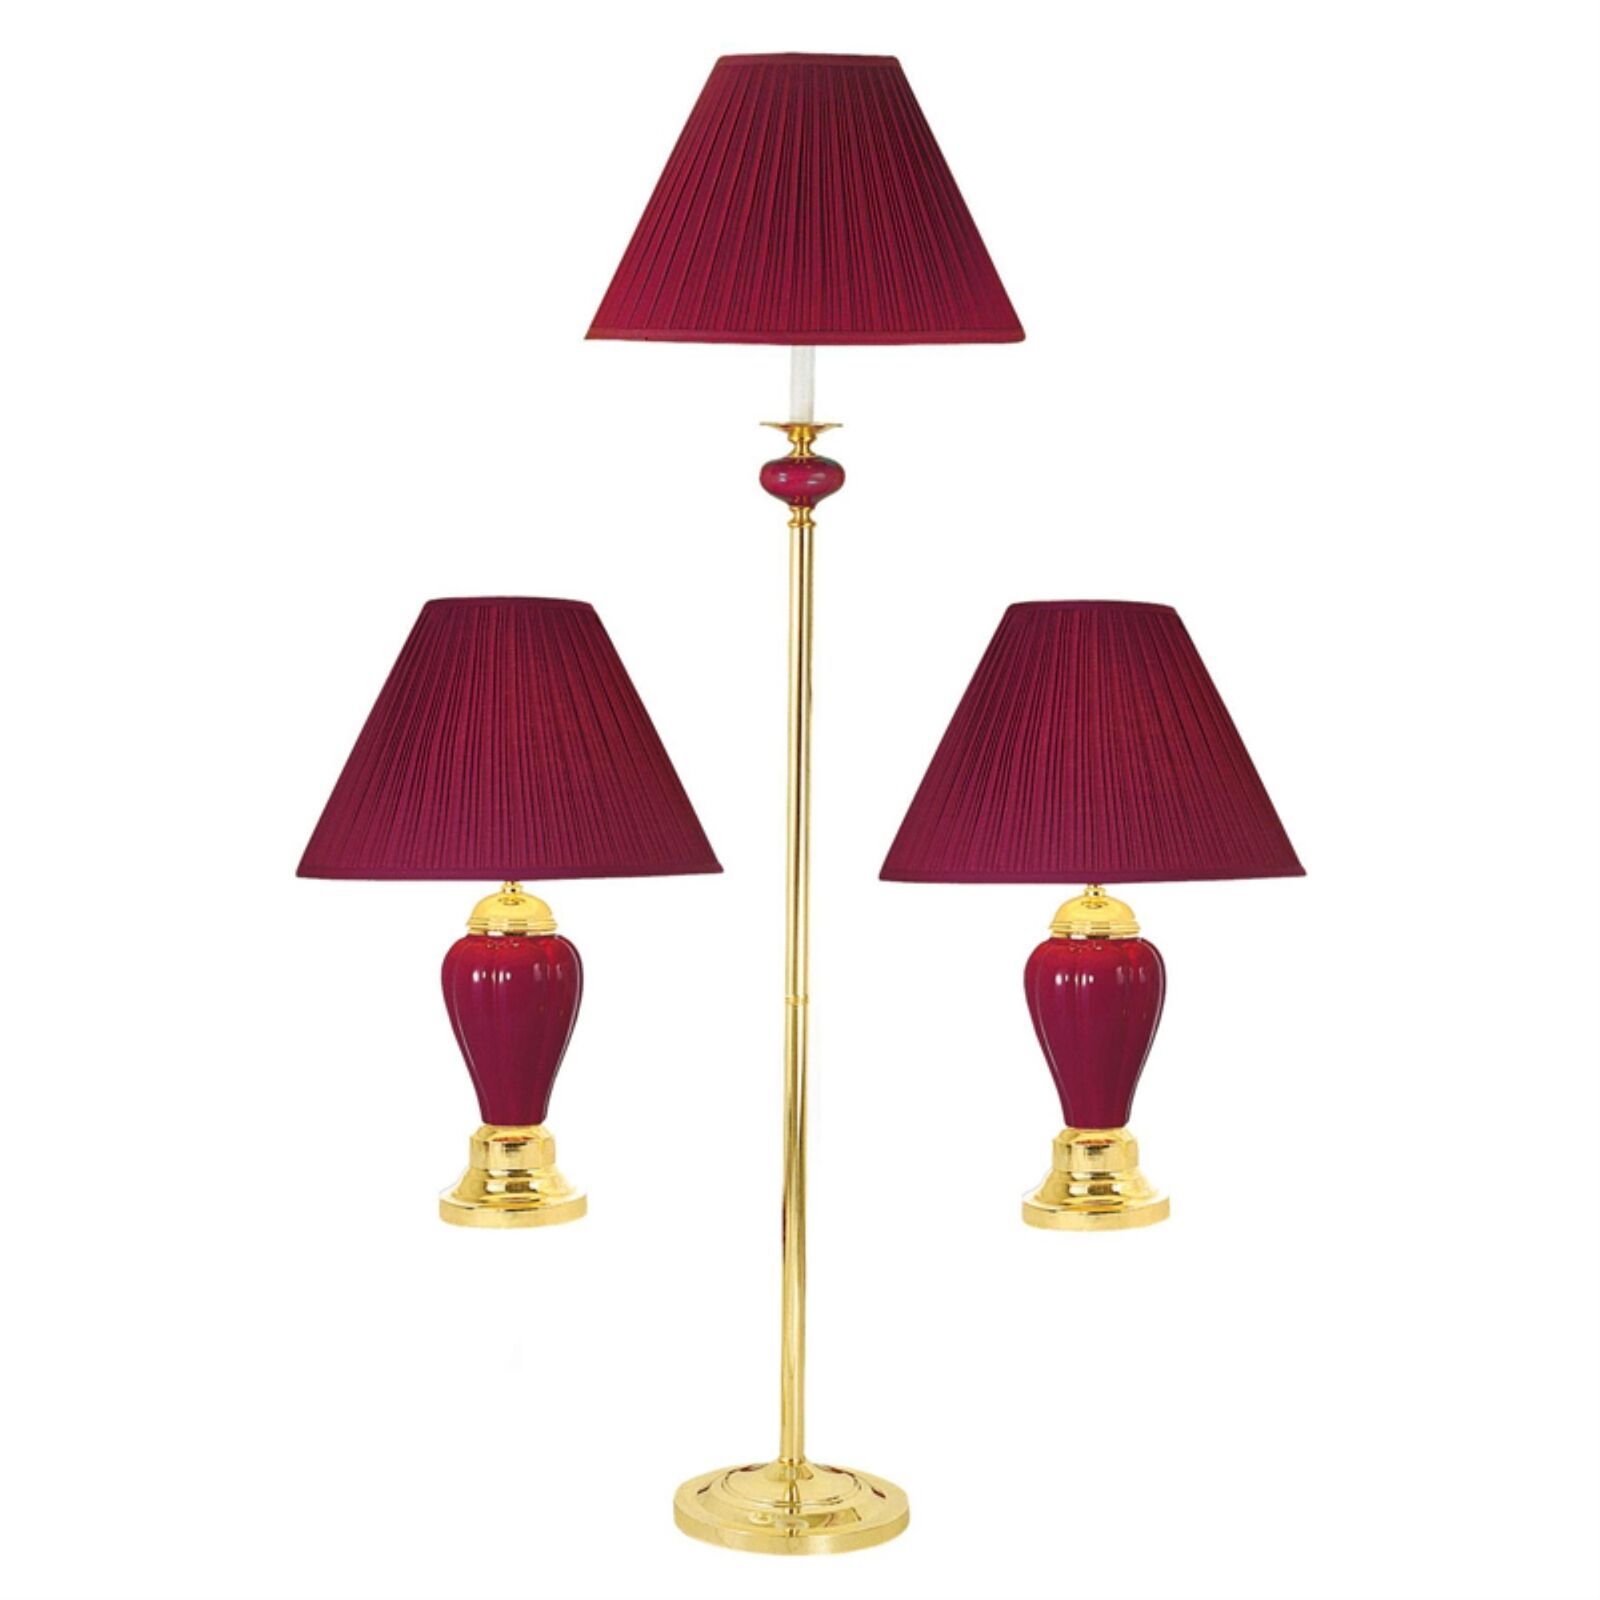 3 Piece Ceramic Lamp Set, Floor And Table Lamps, Burgundy Finish | Ebay Pertaining To 3 Piece Setfloor Lamps (View 3 of 15)